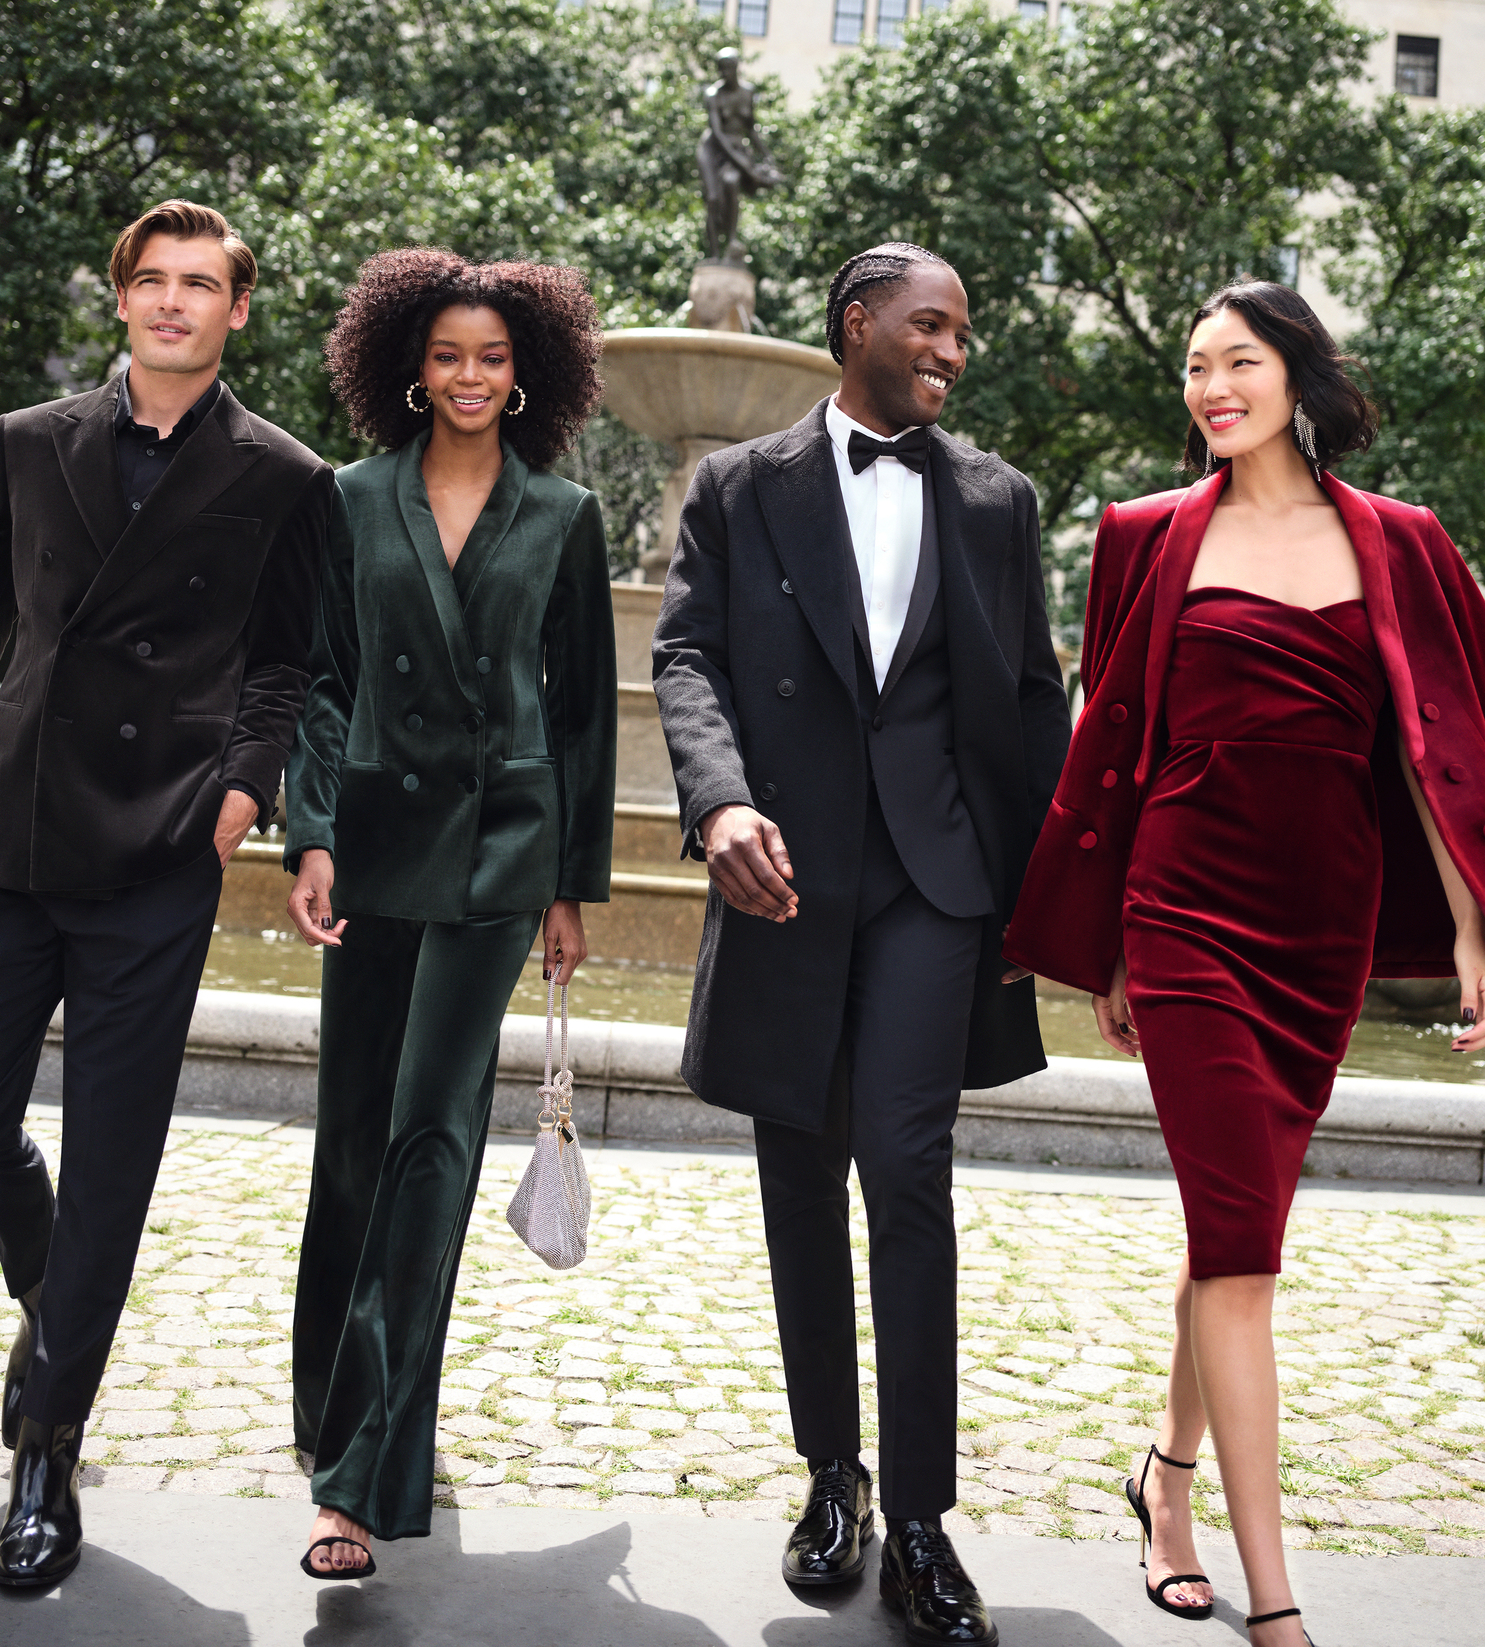 Man with black button-up blazer, woman with green button-up blazer and peal-covered hooped earrings, man with black blazer, white button-up, and black bow tie, and woman with dangly diamond earrings and red velvet outfit and blazer